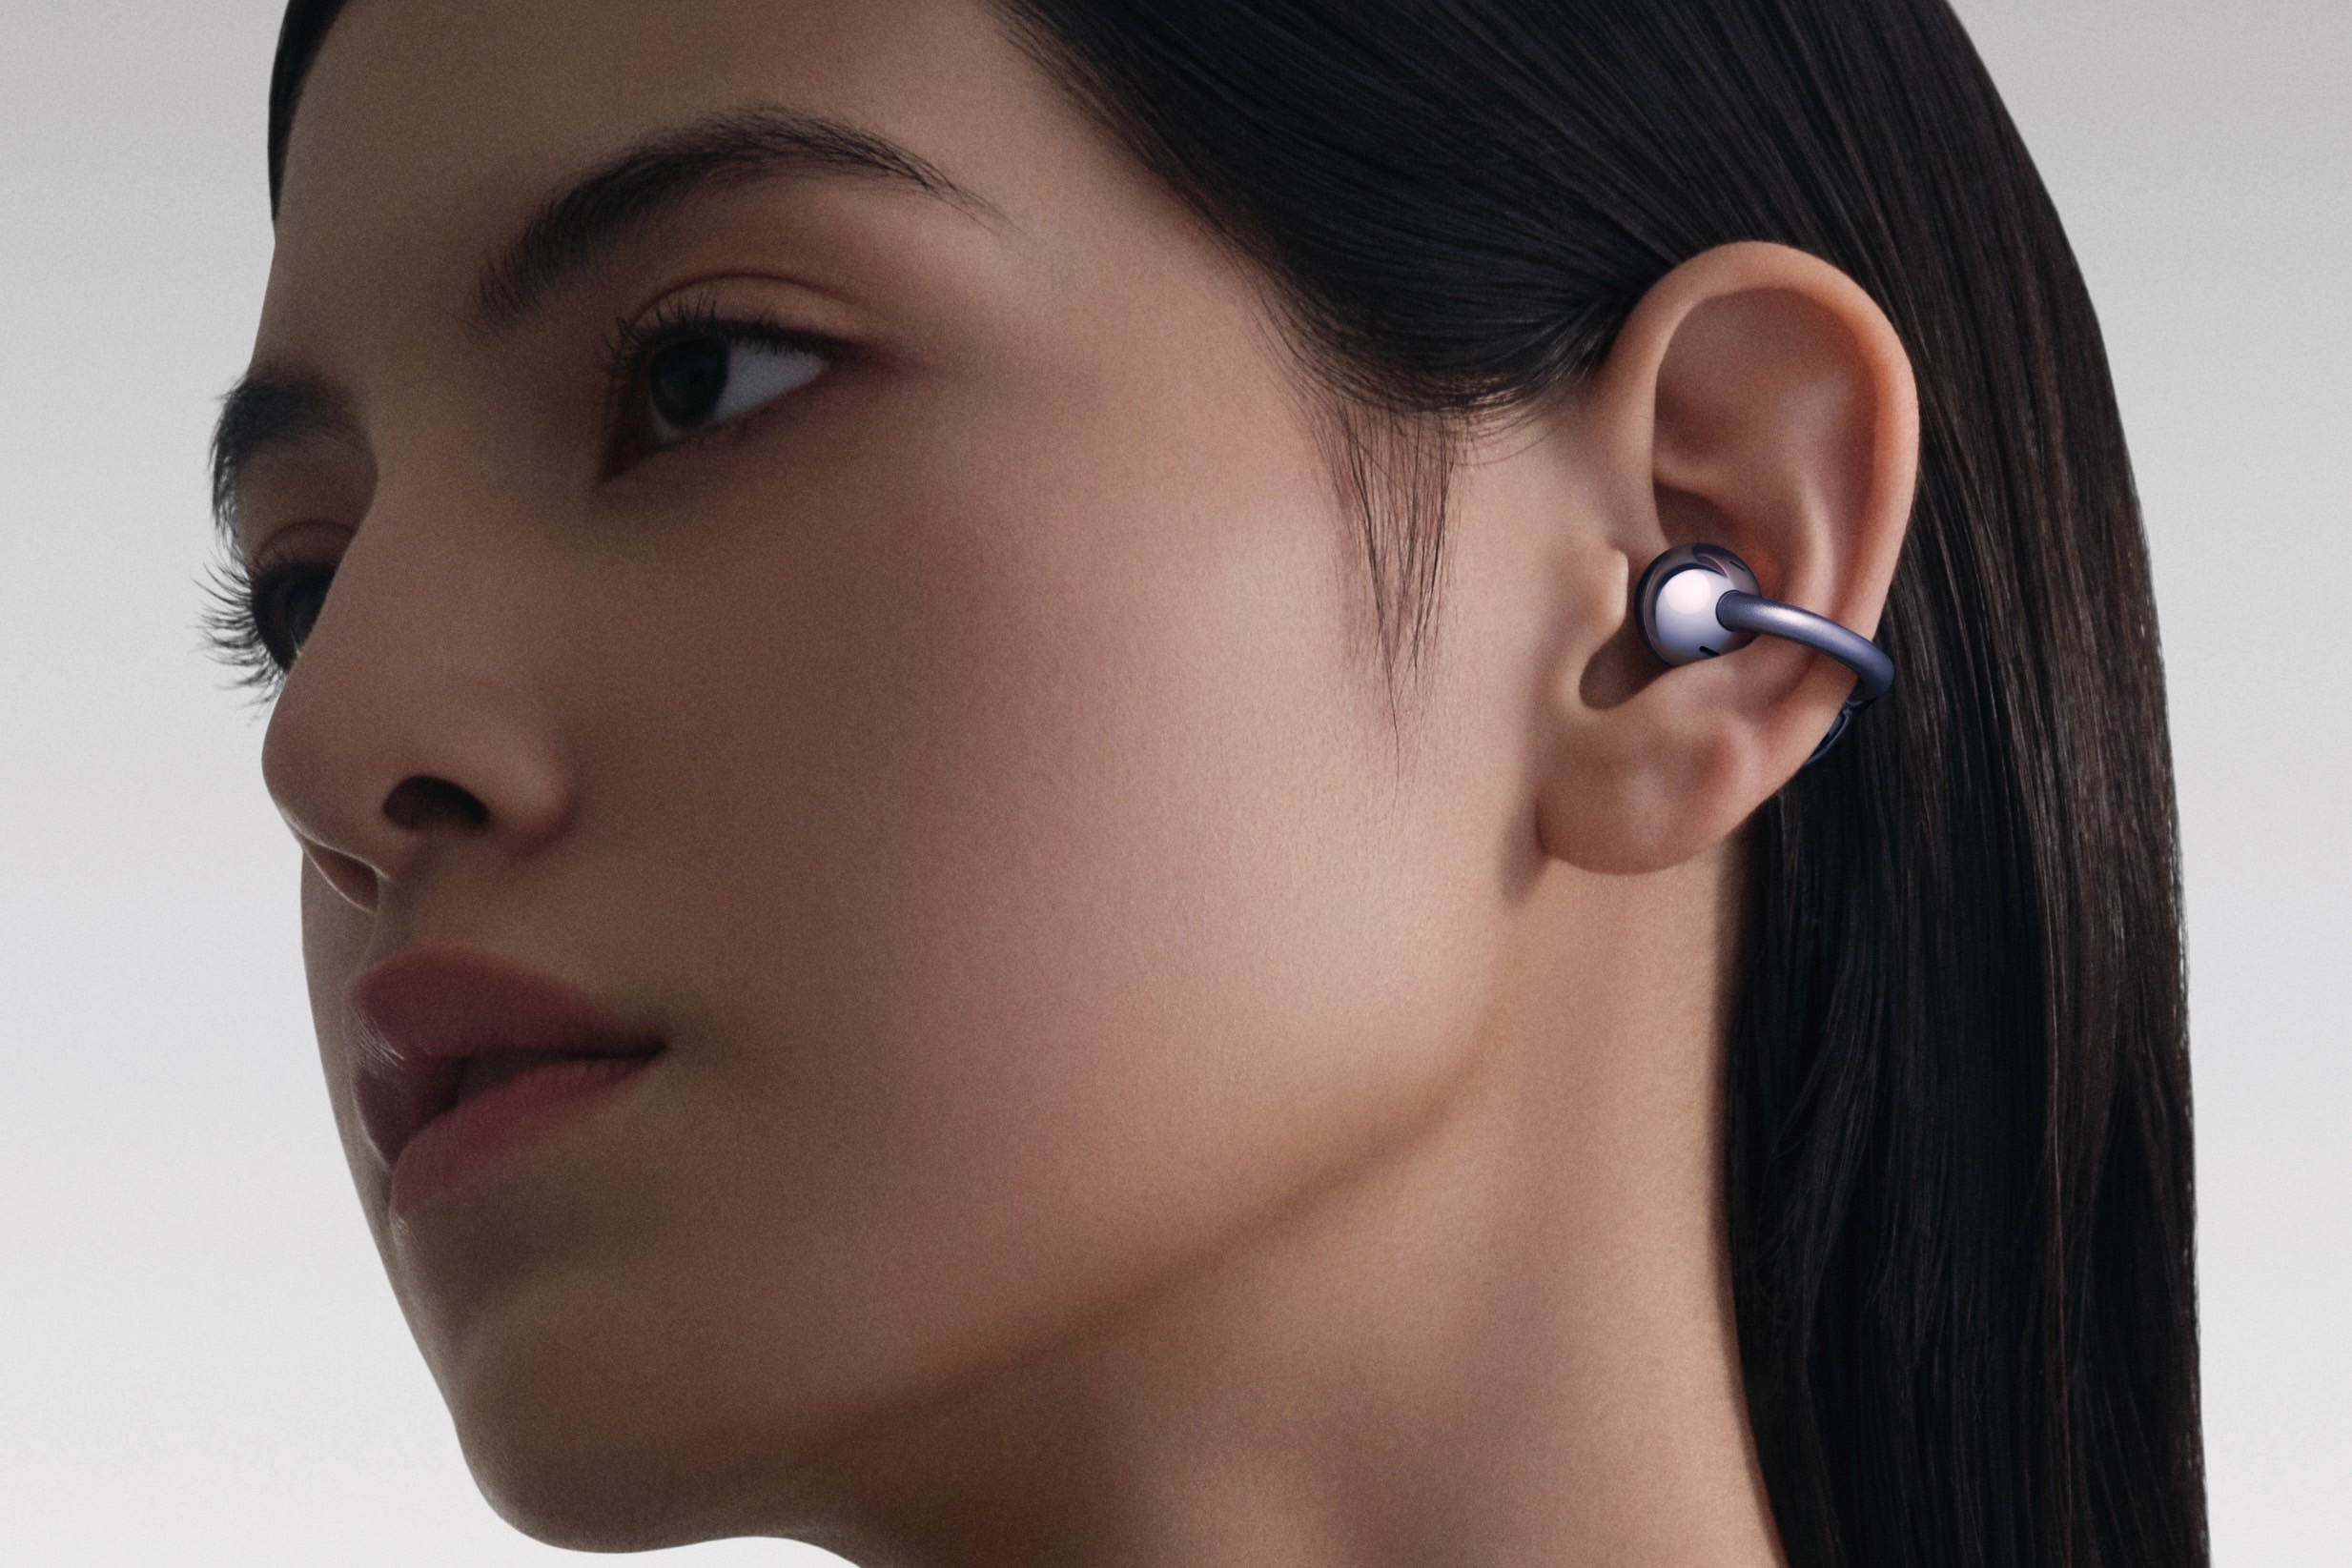 Huawei FreeClip earbuds are official with odd & interesting design